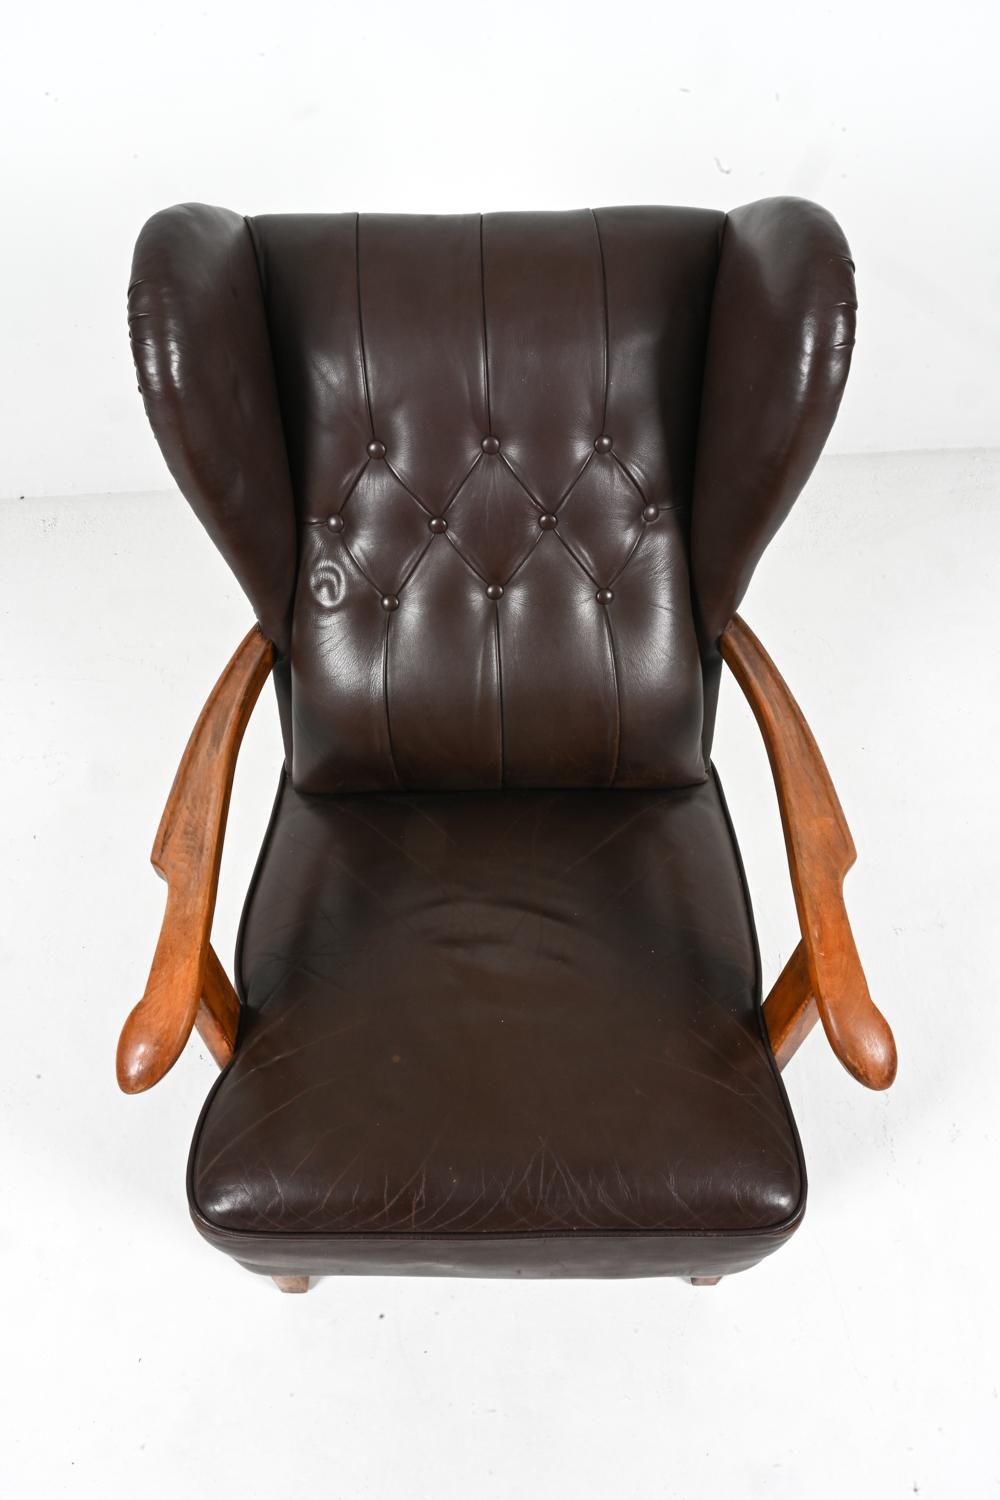 Fritz Hansen Model 1582 Wingback Lounge Chair in Beech & Leather, c. 1940's For Sale 2